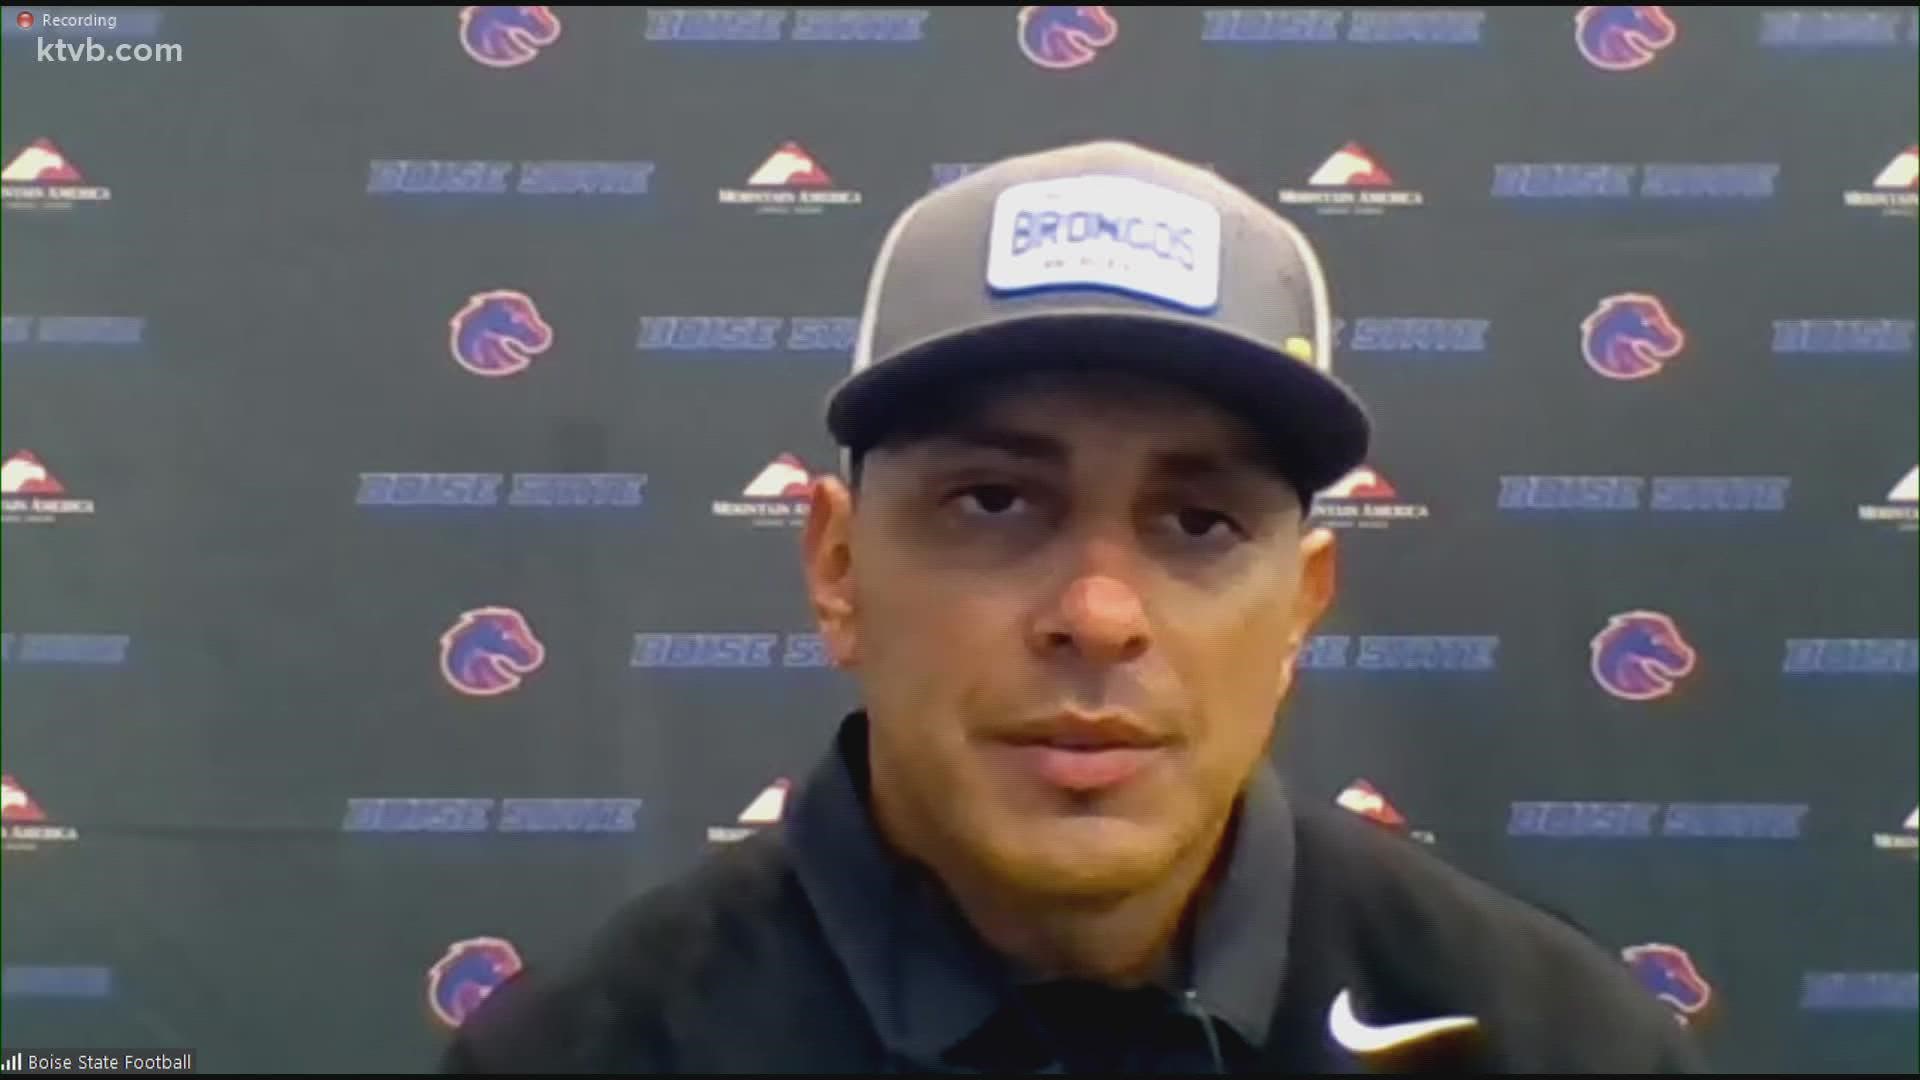 Boise State might have beat UTEP 13-54 on Friday night, but Andy Avalos said the Broncos still have work to do ahead of their game against Oklahoma State.